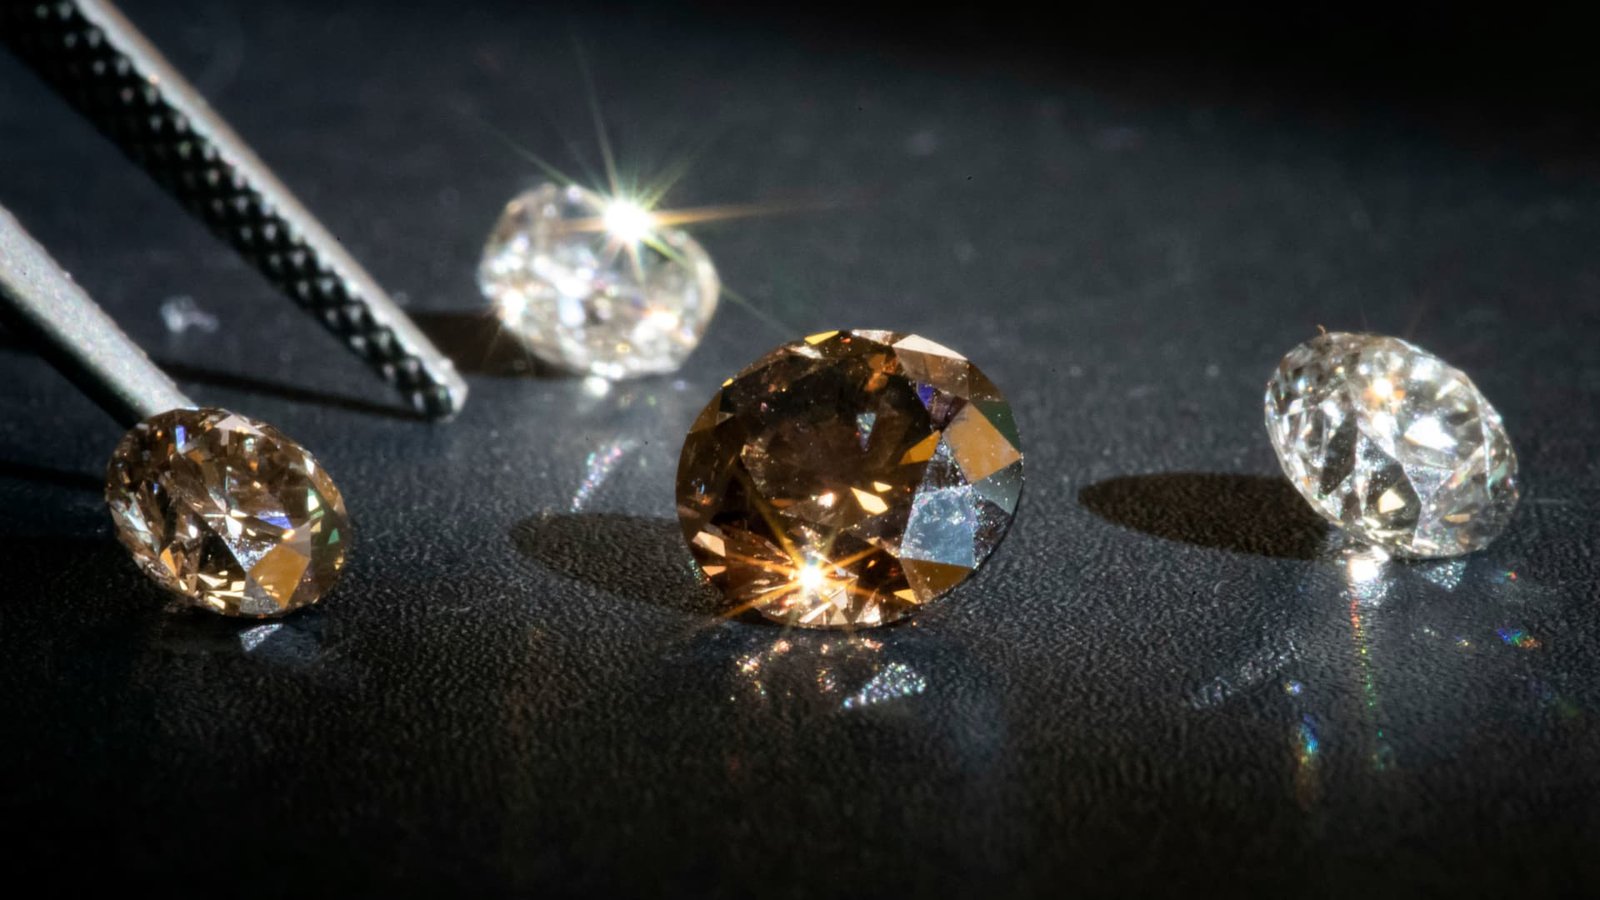 Diamond business ‘in bother’ as lab-grown gems tank costs additional